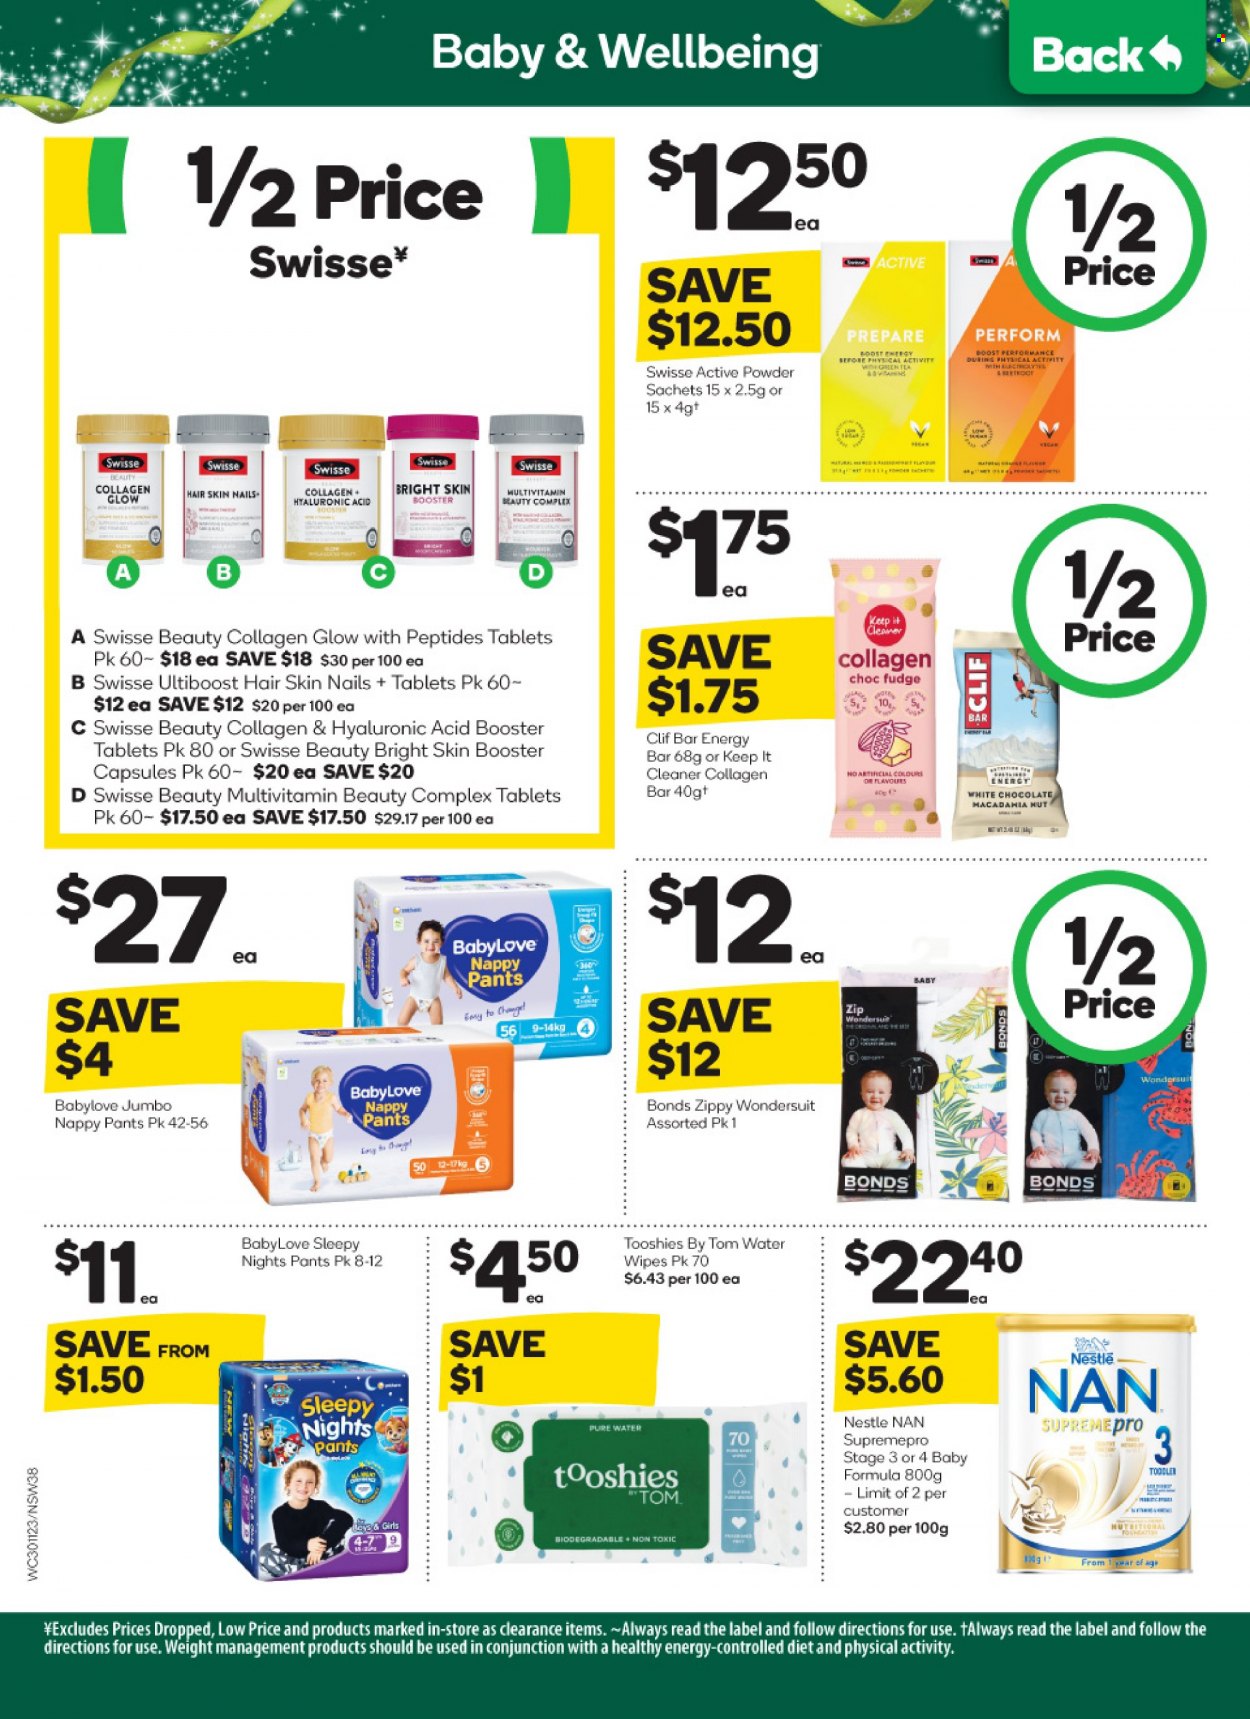 thumbnail - Woolworths Catalogue - 30 Nov 2022 - 6 Dec 2022 - Sales products - fudge, Nestlé, white chocolate, chocolate, purified water, Nestlé NAN, wipes, pants, nappies, BabyLove, cleaner, Swisse, Bonds, multivitamin. Page 38.